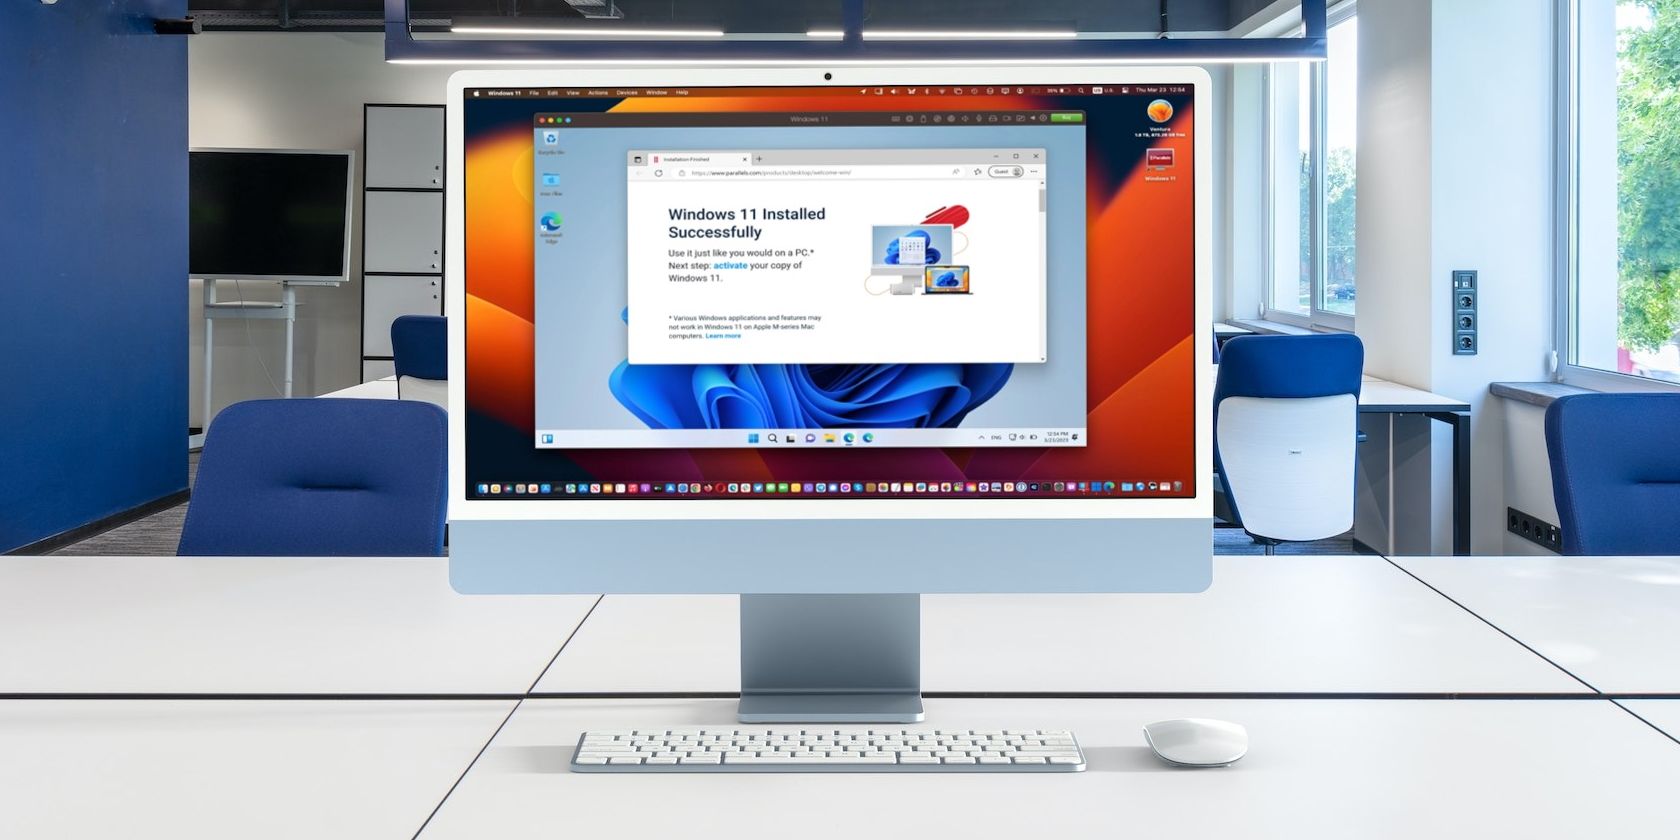 Windows 11 running on an iMac with Parallels Desktop